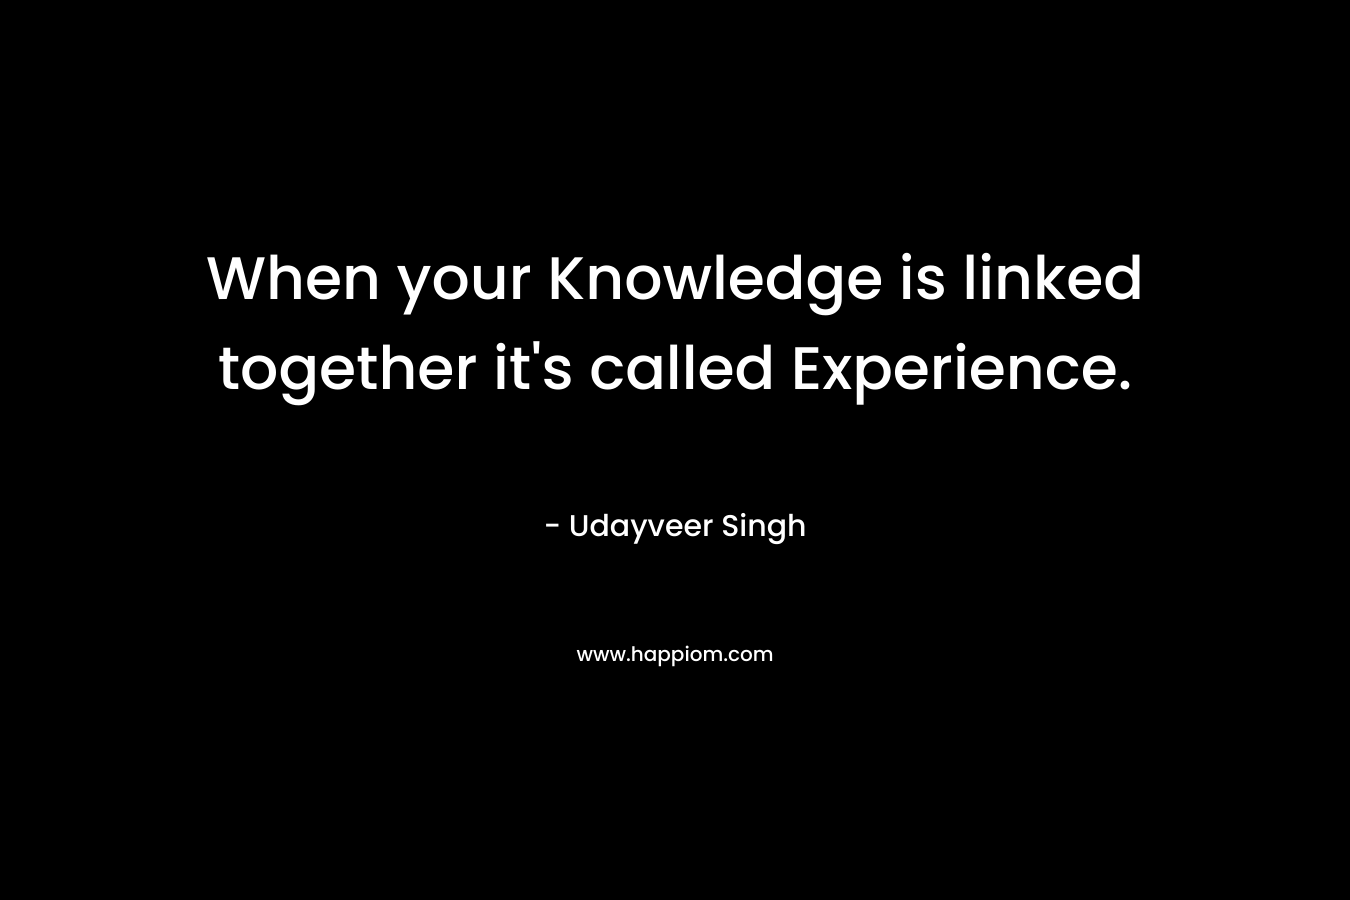 When your Knowledge is linked together it's called Experience.